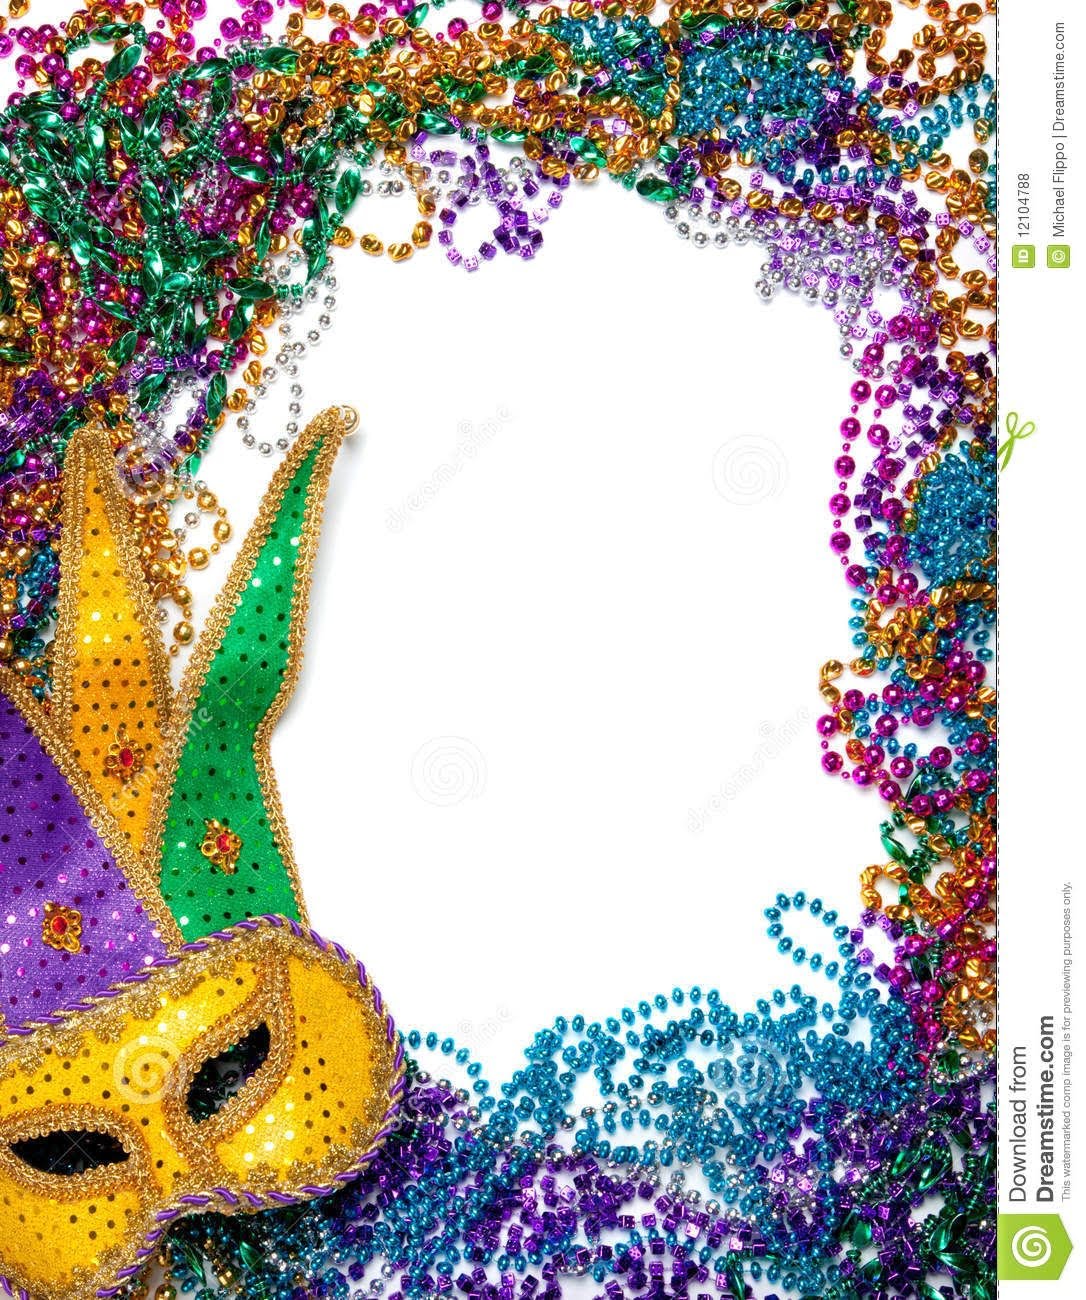 Border Made Of Mardi Gras Bead And Mask On White Mardi Gras Invitations Mardi Gras Beads Mardi Gras Centerpieces